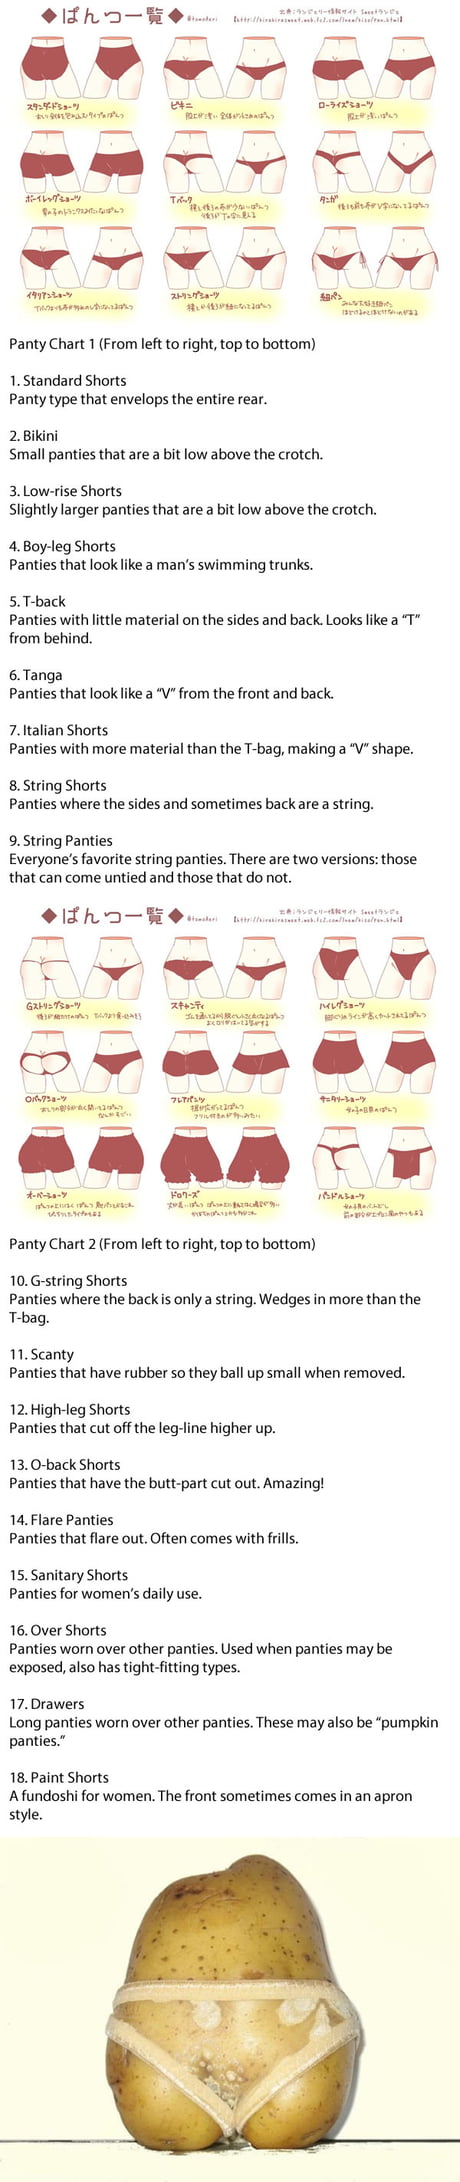 Japanese Twitter presents chart of all panty types, for  panty-identification science